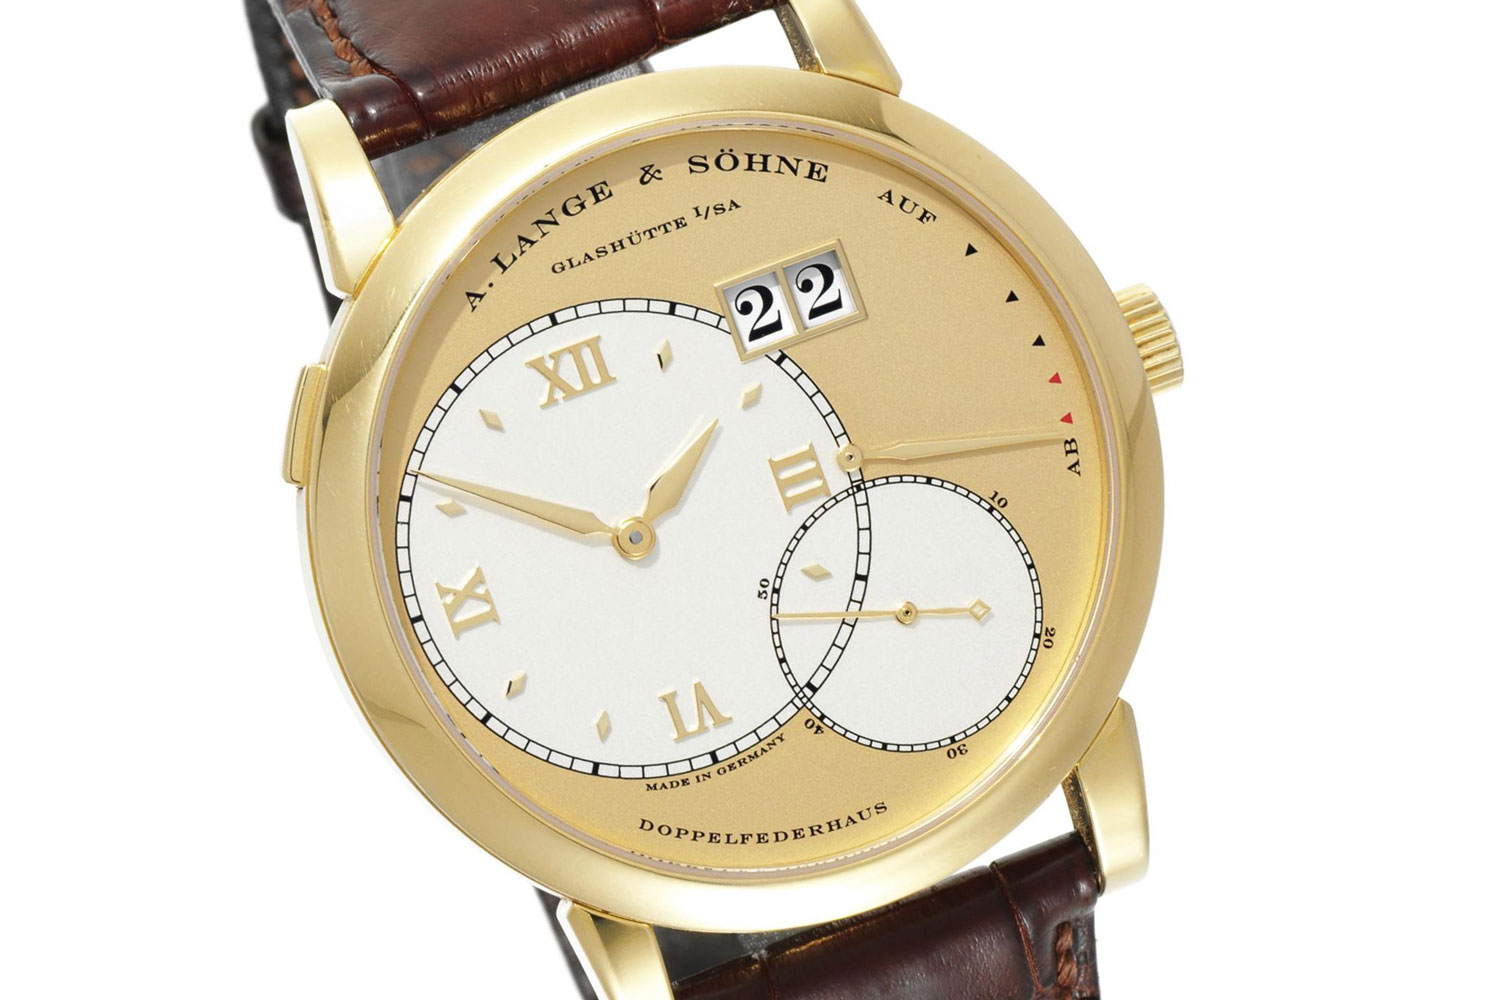 An early Grand Lange 1 Ref 115.021 in yellow gold (Image: sothebys.com)